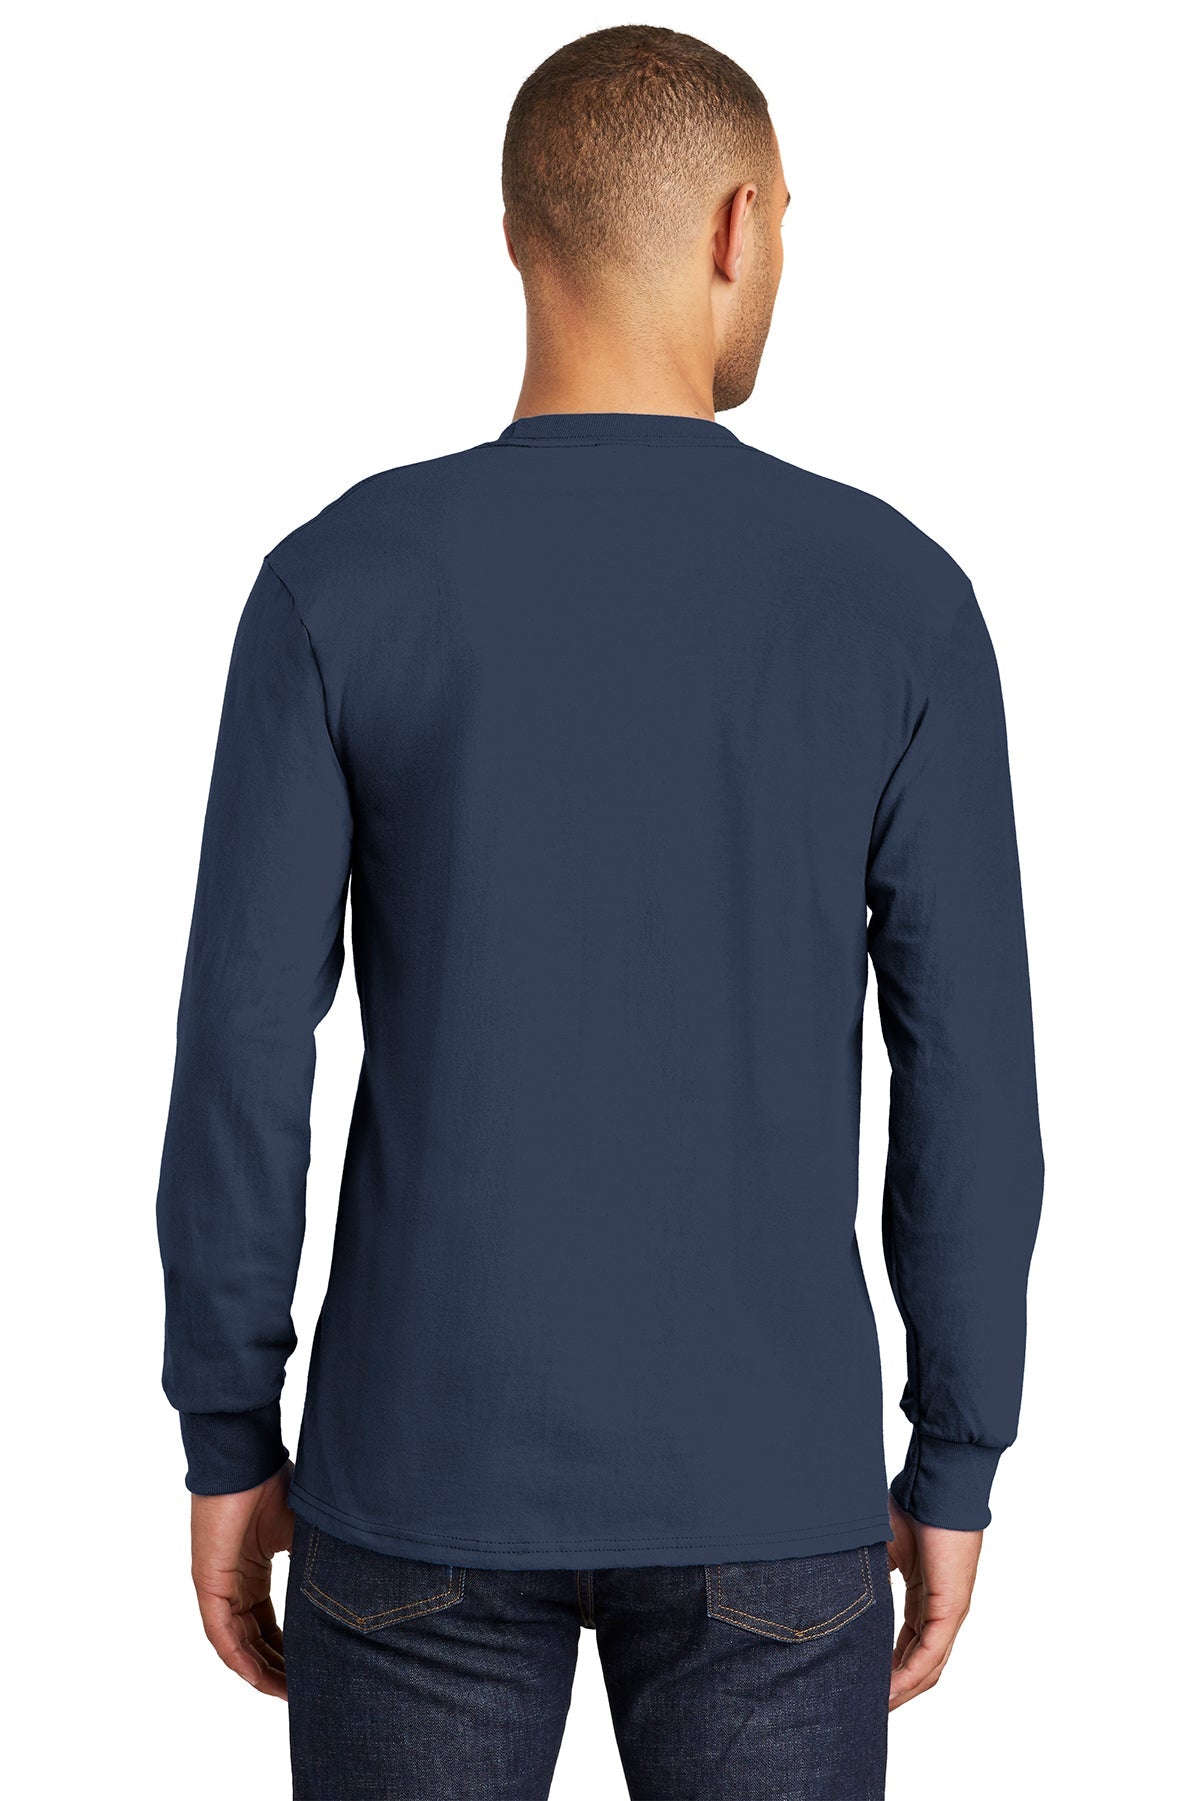 Port & Company Tall Long Sleeve Branded Essential Pocket Tee's, Navy